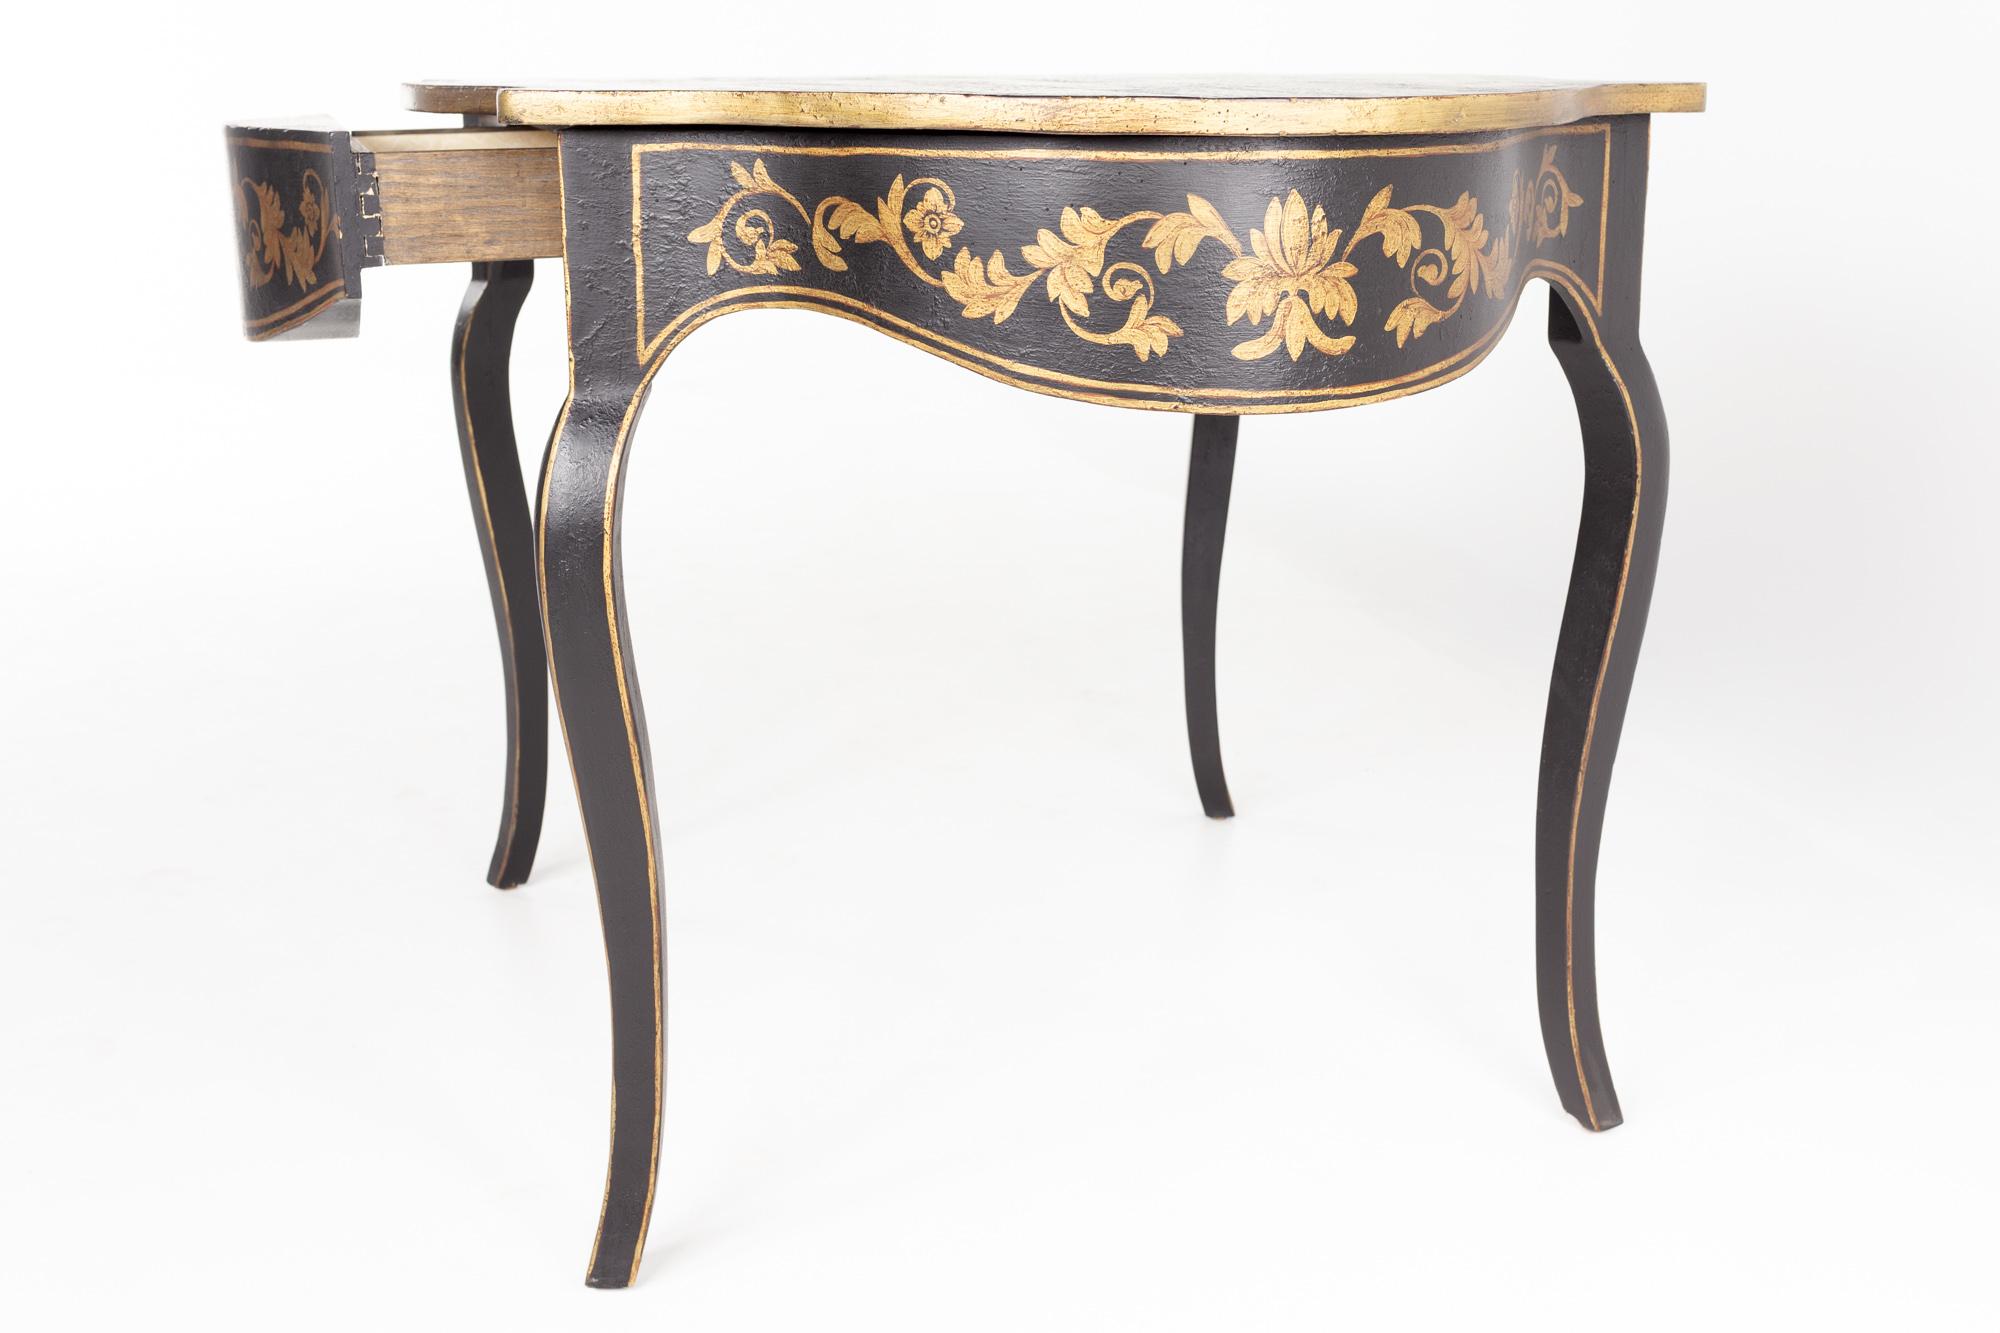 Modern Amy Howard Contemporary Black and Gold Desk